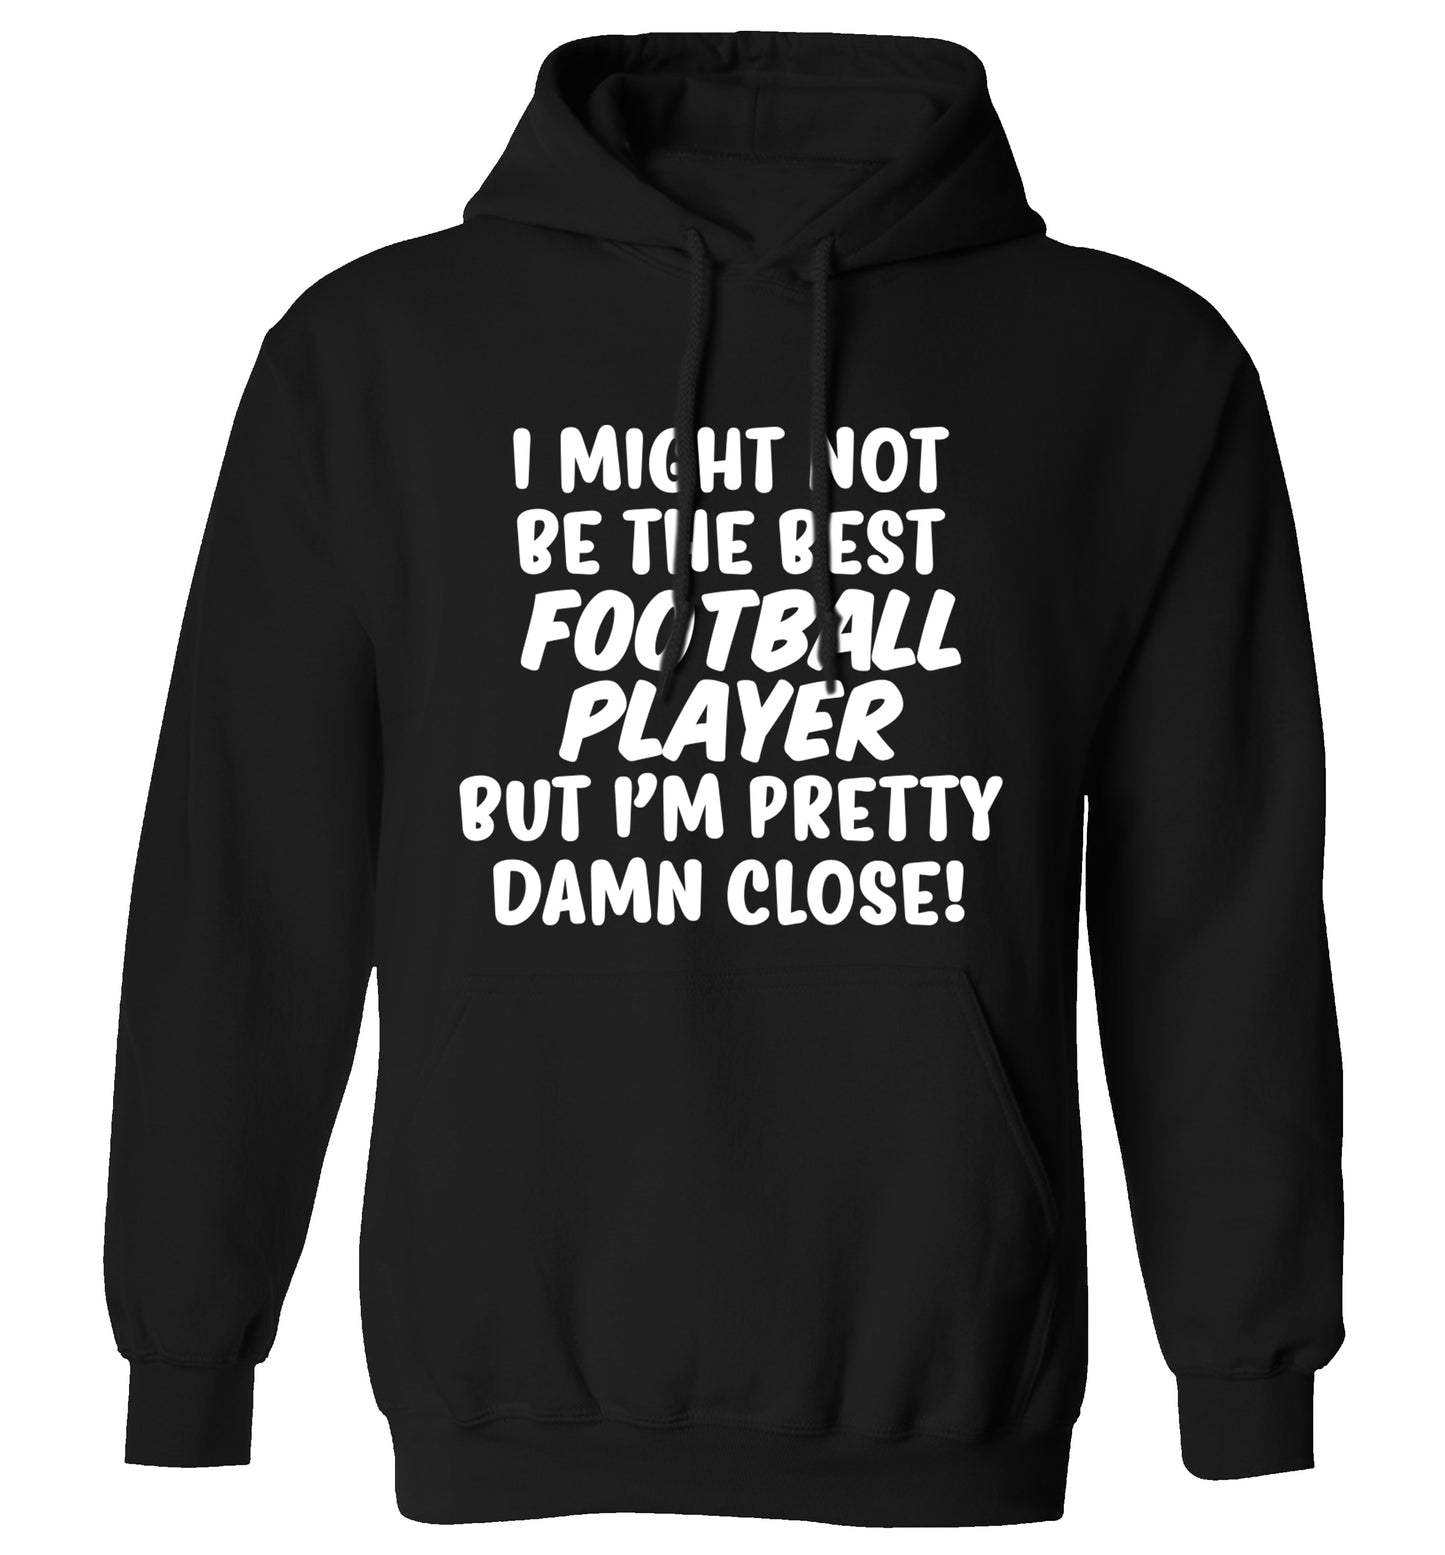 I might not be the best football player but I'm pretty close! adults unisexblack hoodie 2XL